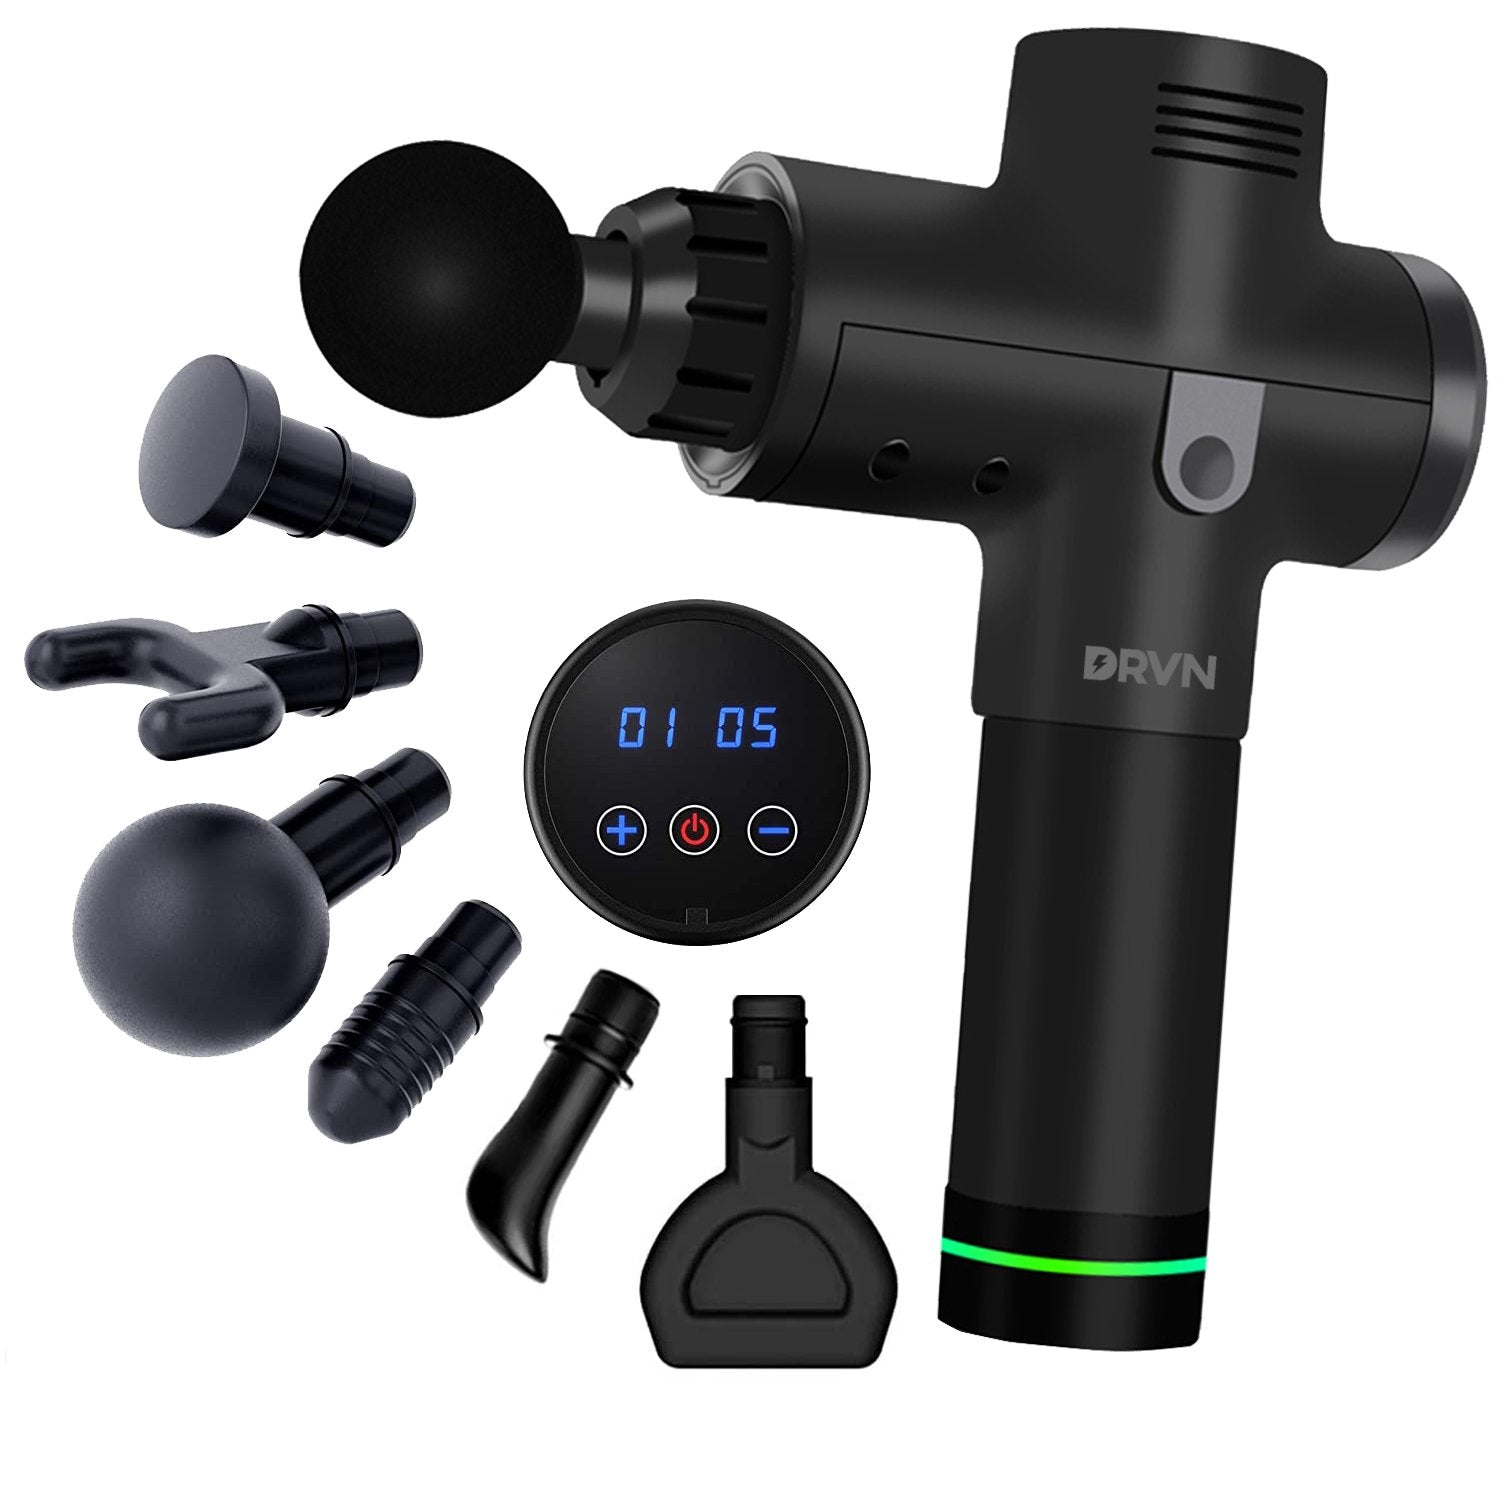 Link Deep Tissue Massage Gun For Sports, Athletes, Pain Relief and Muscle  Relief with 4 Interchangeable Heads and 6 Speeds - Black